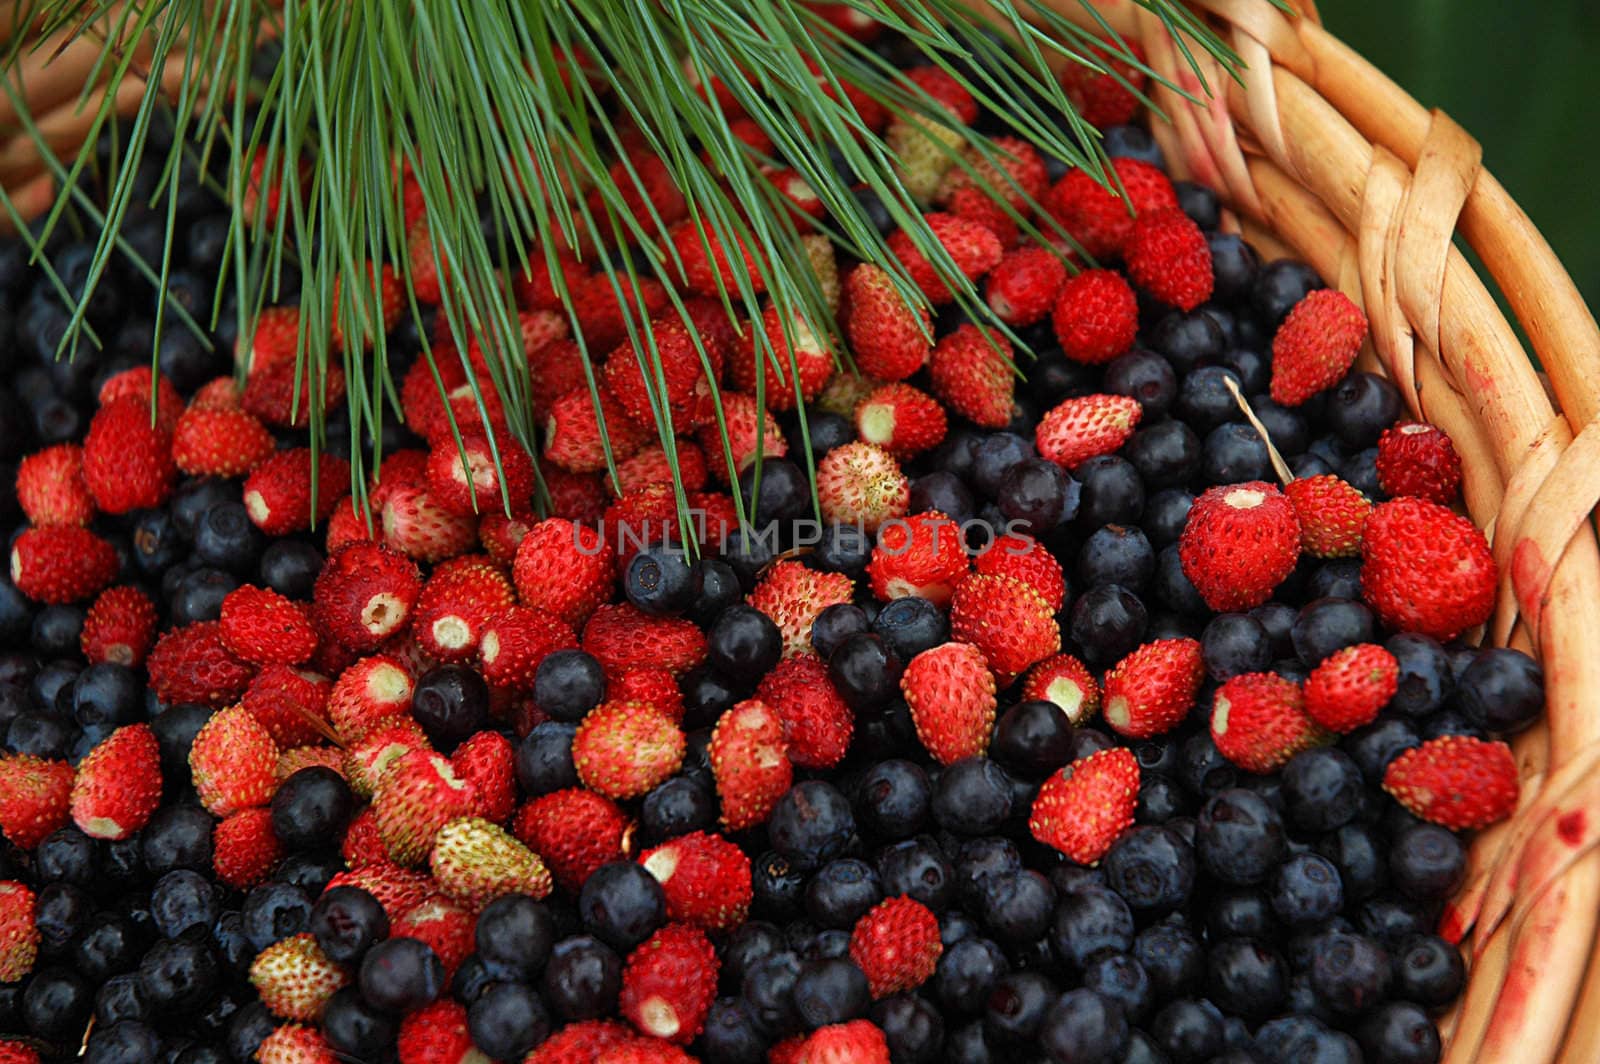 Mix of wood berries: wild strawberry and a bilberry